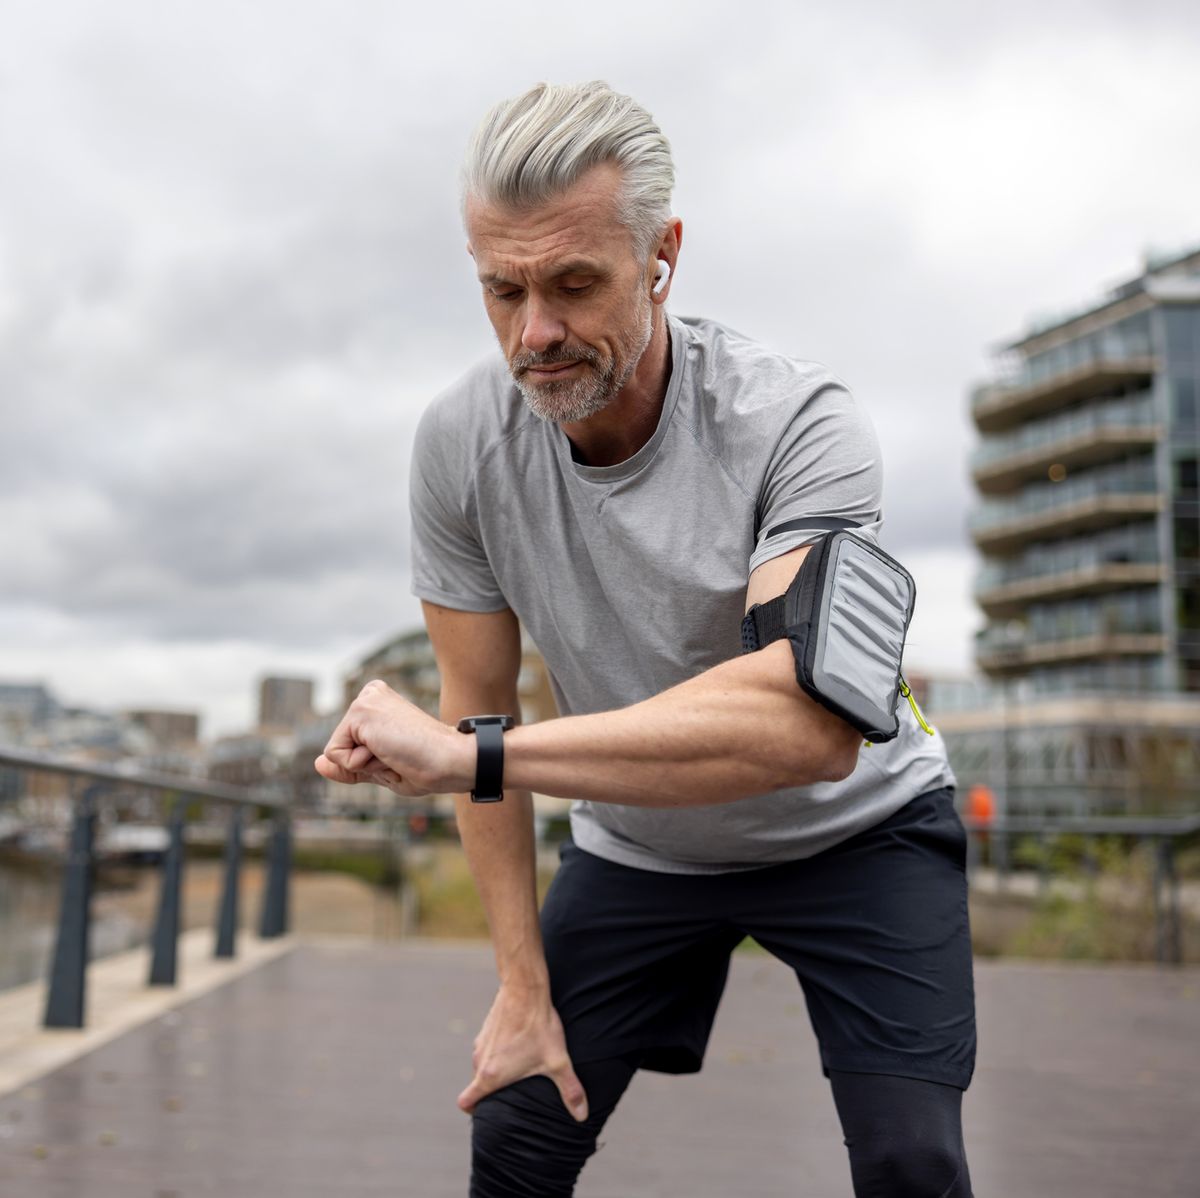 Transform your life in 12 weeks: The science behind Get Age Fit's age-appropriate  fitness programs